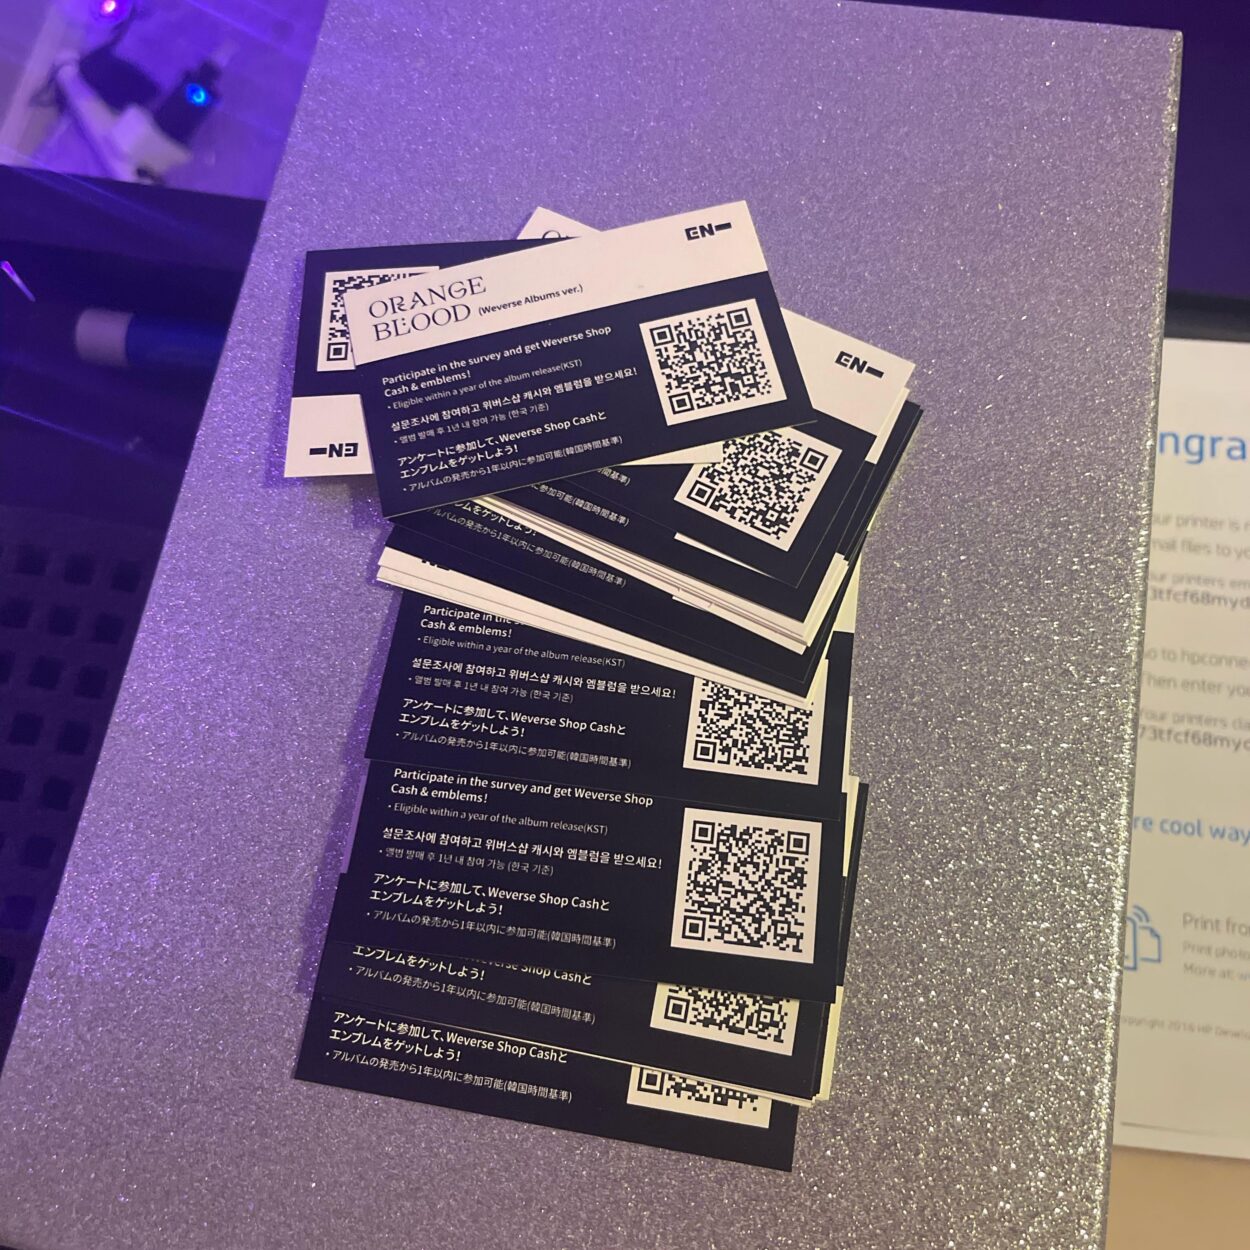 What to do with Weverse Cash QR codes?